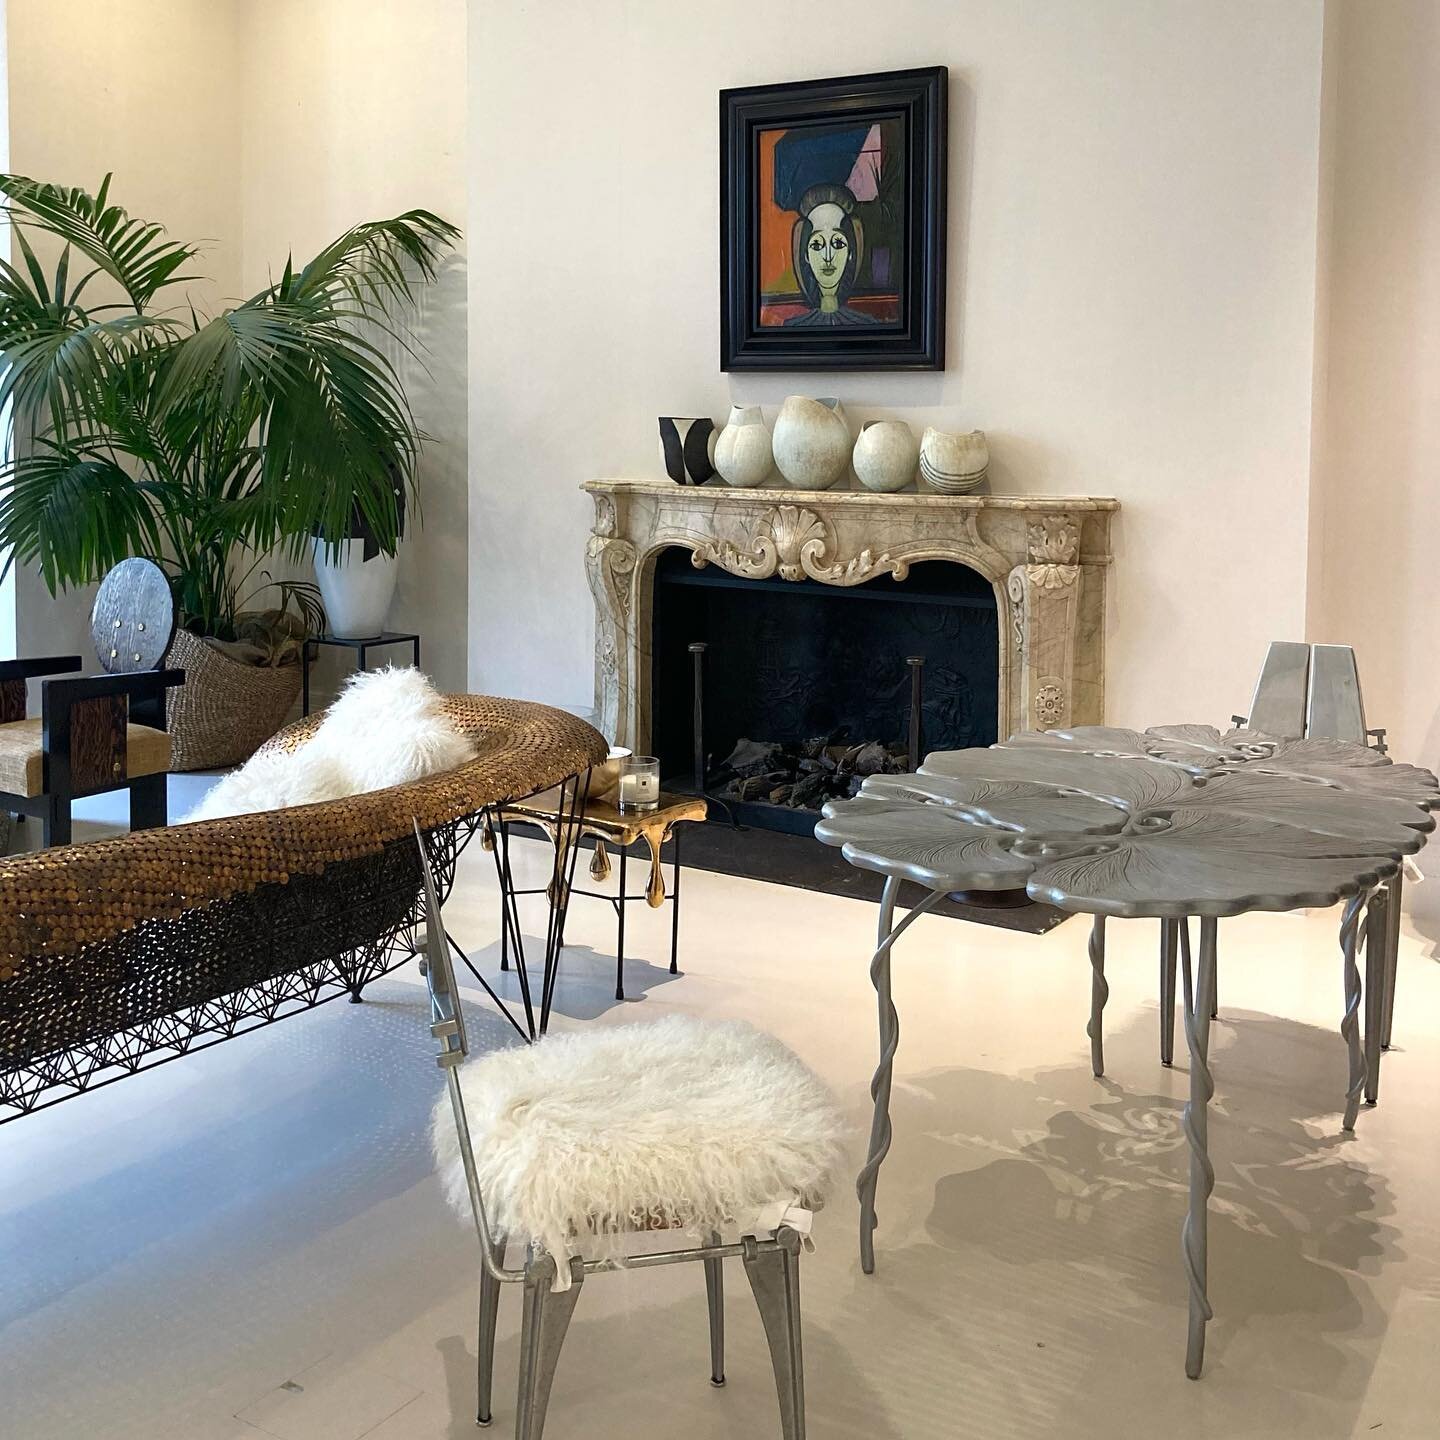 Excited for this table and bed commissioned by the late Lady Victoria de Rothschild to be going under the hammer at Christie&rsquo;s in London today!
.
.
.
@christiesinc @tomaszstarzewski @theworldofinteriors